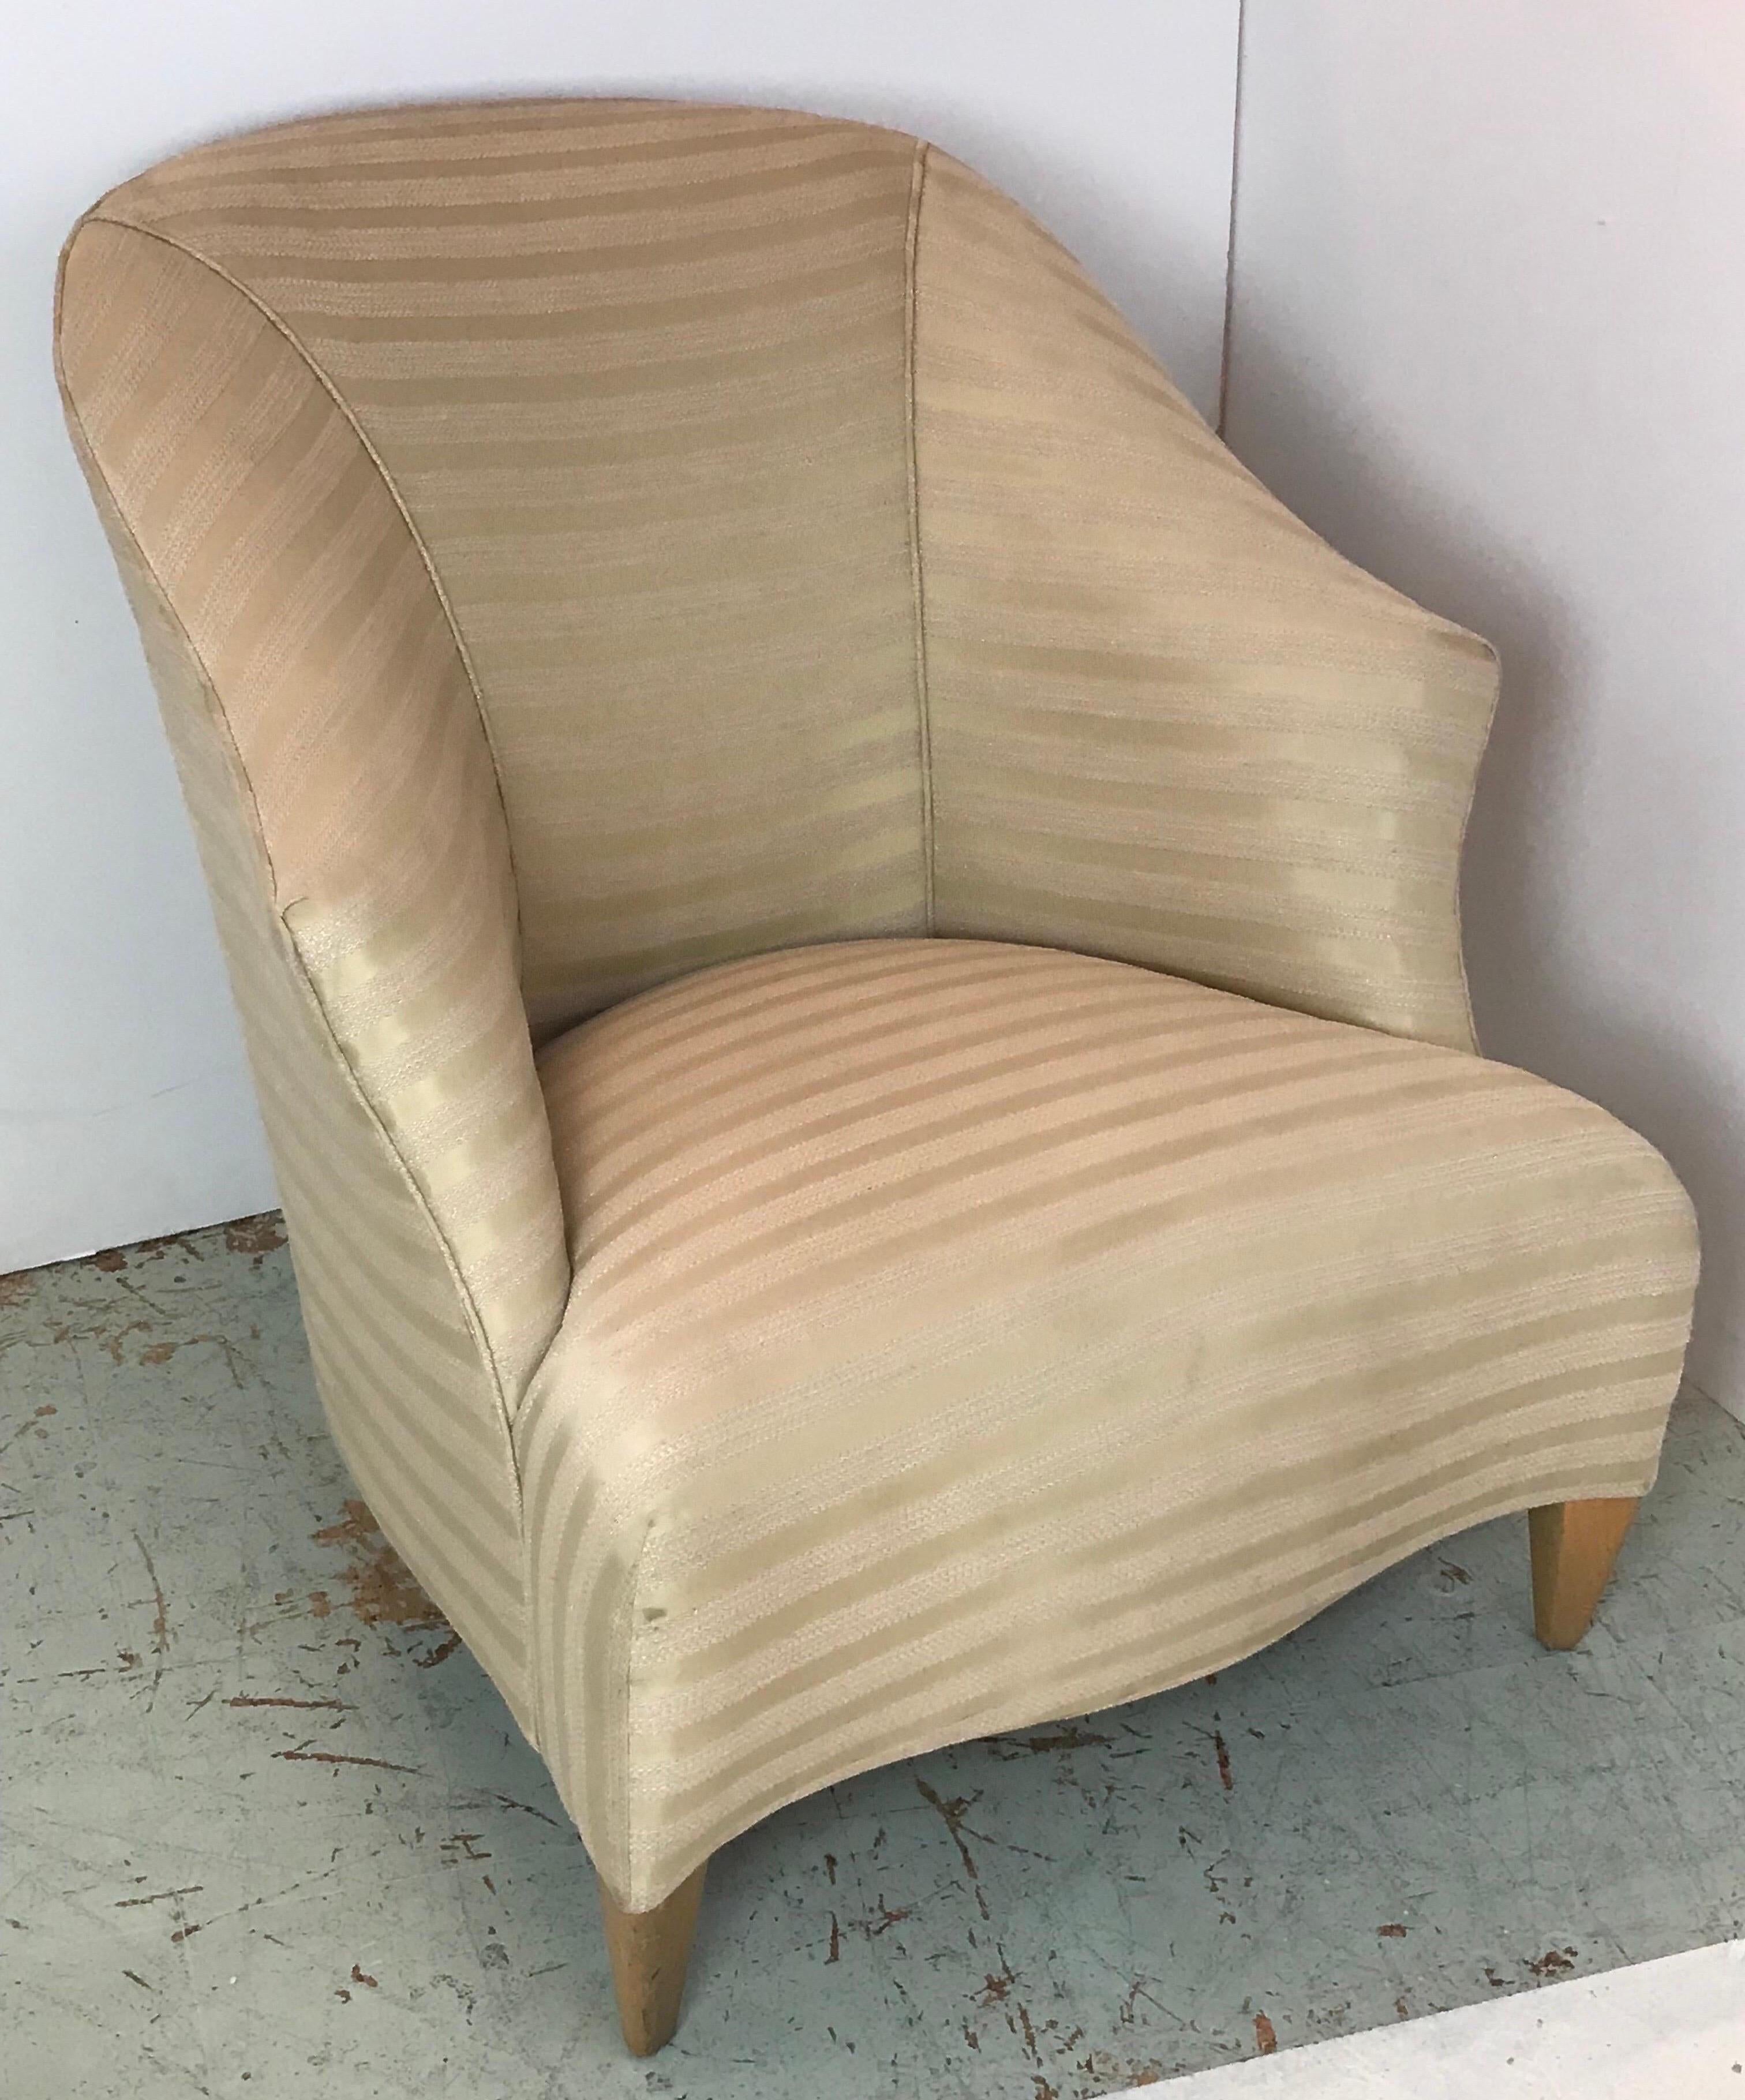 A rare 1990’s John Hutton Designs for Donghia club chair from a series of updates to classical lines with an anthropomorphic slightly exaggerated design motif of era titled alternately Ghost and Spirit. This Club chair bears the hallmarks of chairs